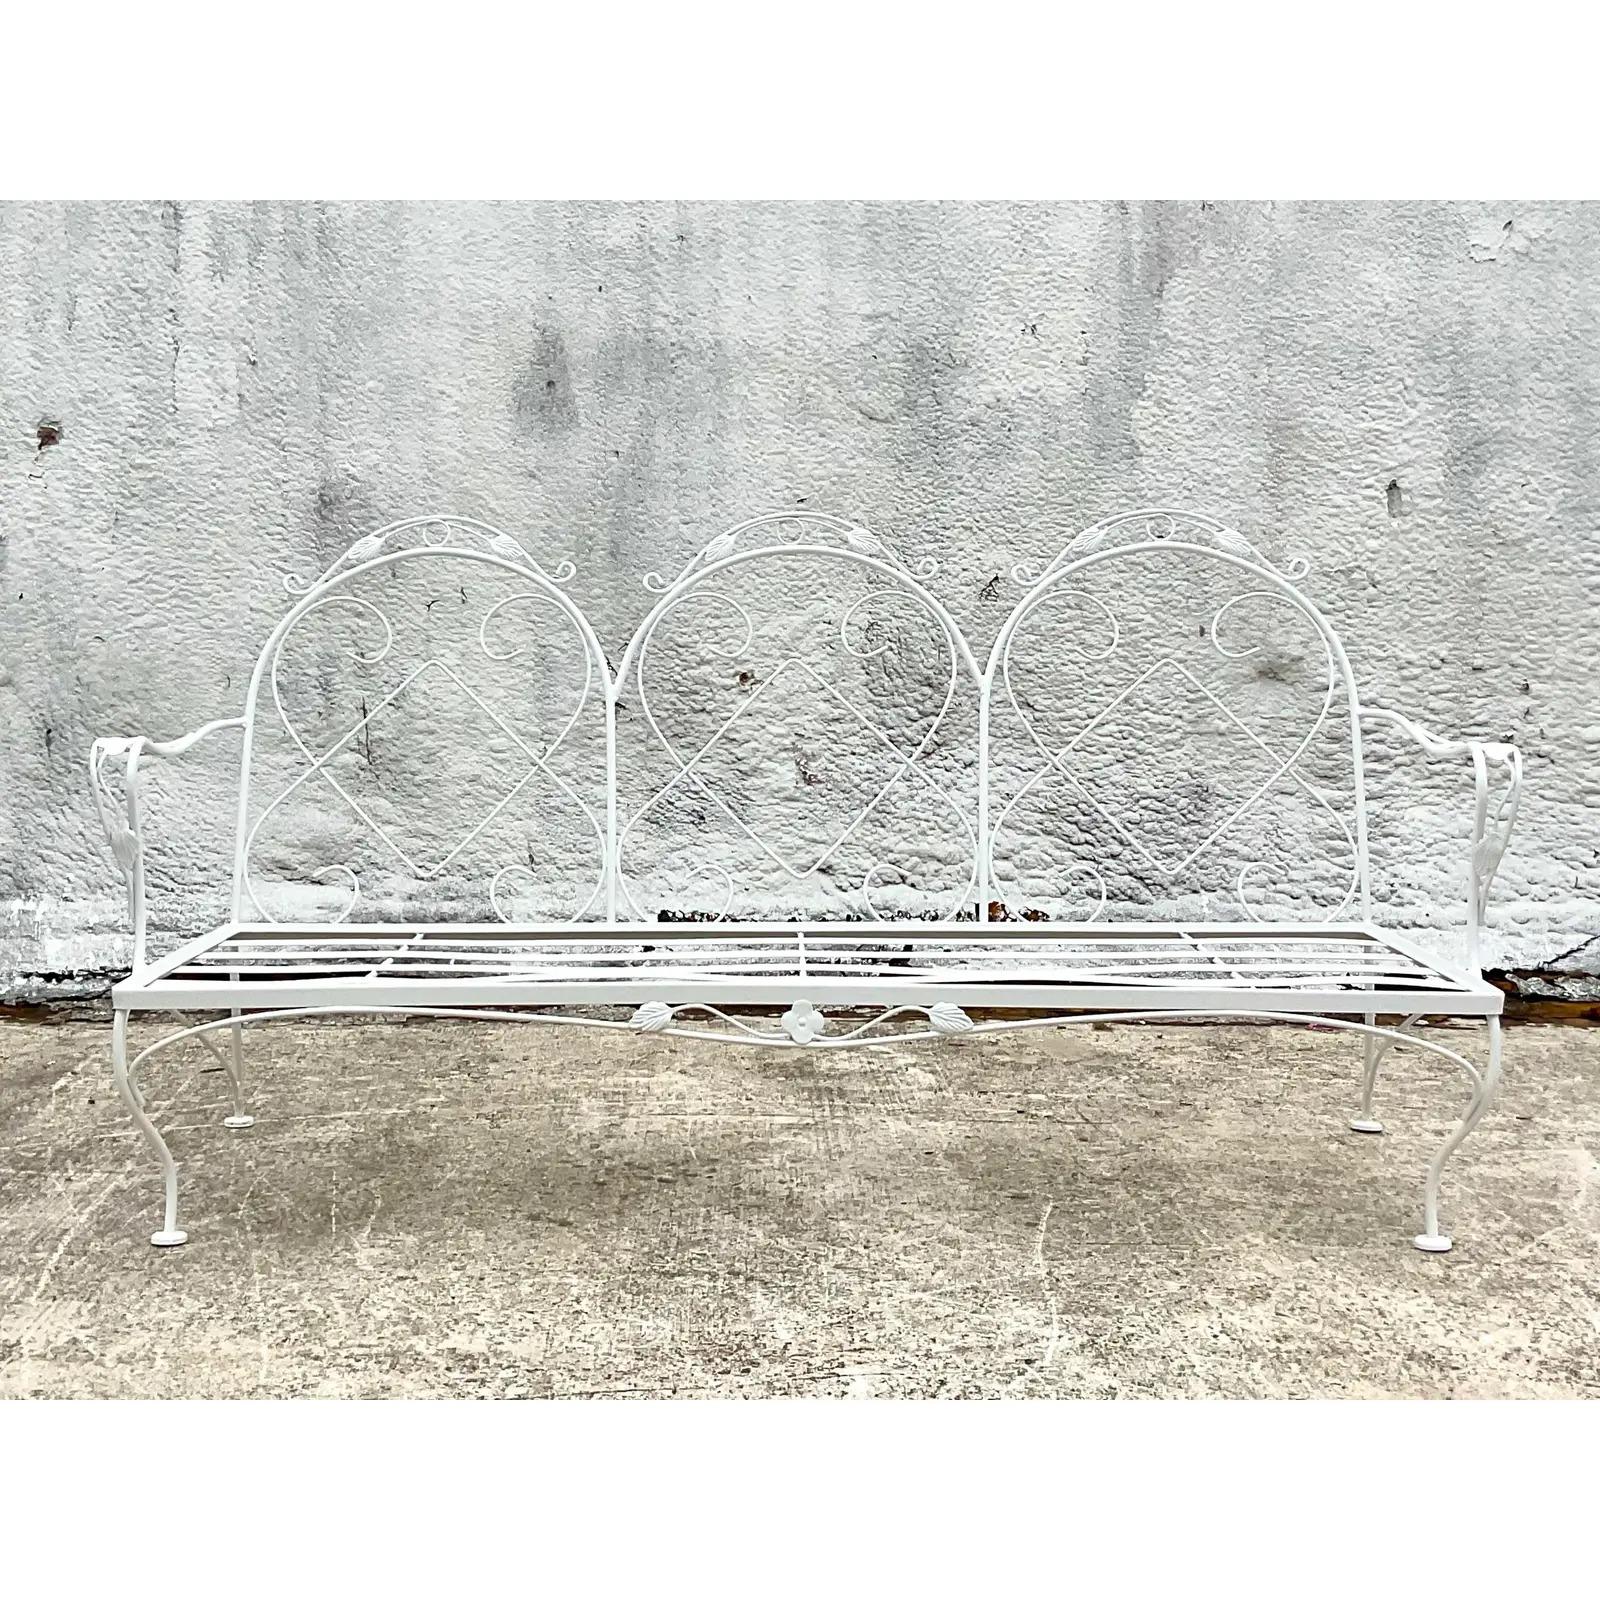 Vintage Coastal Wrought Iron Sofa. A really beautiful and unusual design. All new sandblasting and powder coating in a high gloss white. Acquired from a Palm Beach estate.